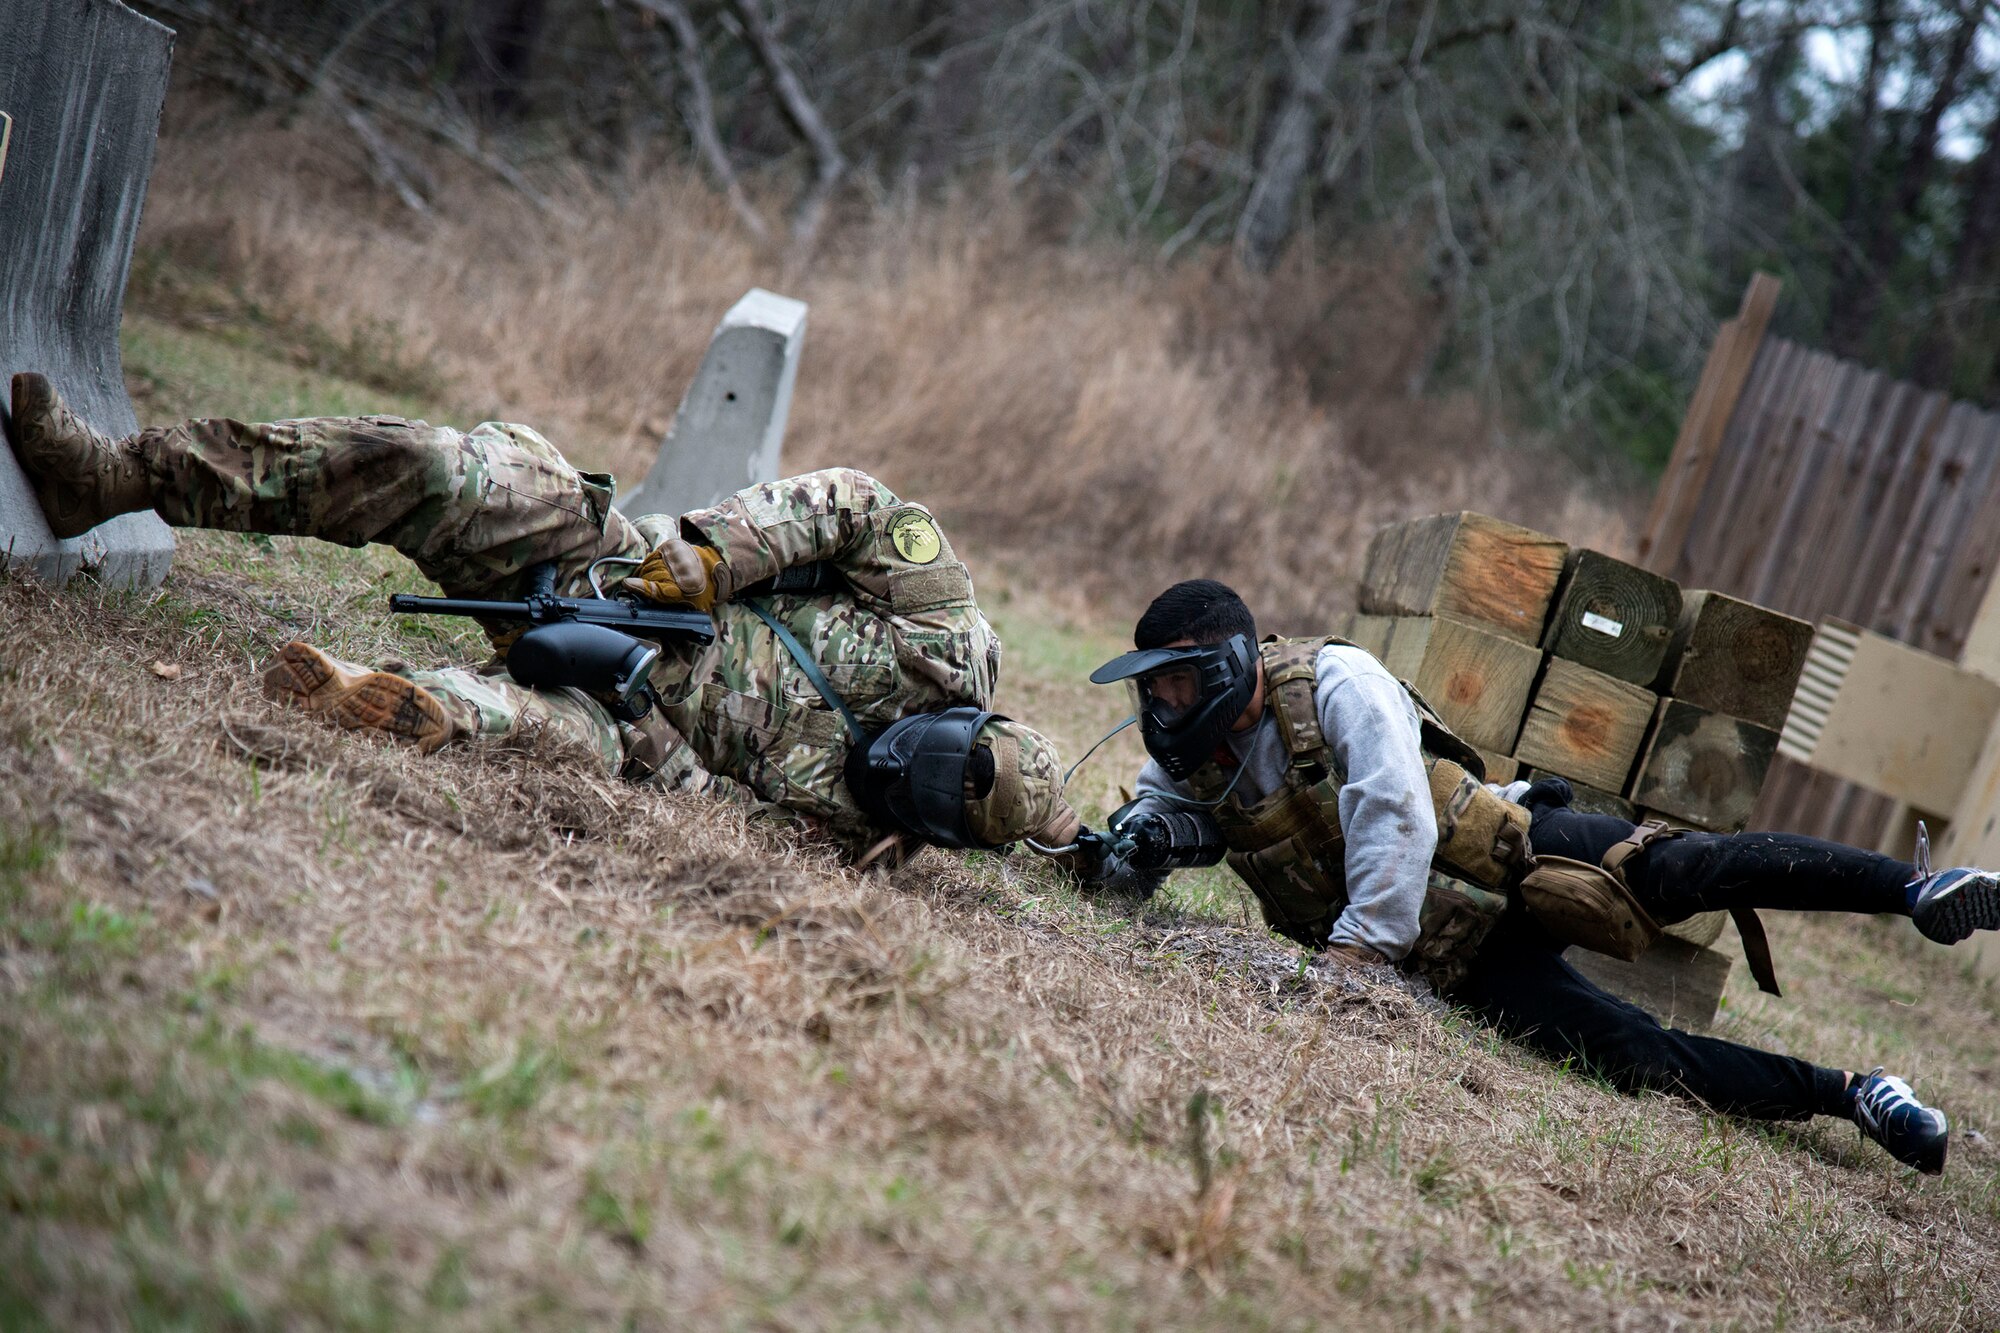 Airman 1st Class Andruw Reyes, right, 23d Maintenance Squadron nondestructive inspection technician, lunges toward Staff Sgt. Michael Triana, 347th Operations Support Squadron, in a high threat evasion scenario during a Tactical Combat Casualty Care course, Feb. 14, 2018, at Moody Air Force Base, Ga. The training is designed to teach Airmen how to apply critical life-saving skills while engaged in a combat environment. (U.S. Air Force photo by Airman 1st Class Erick Requadt)